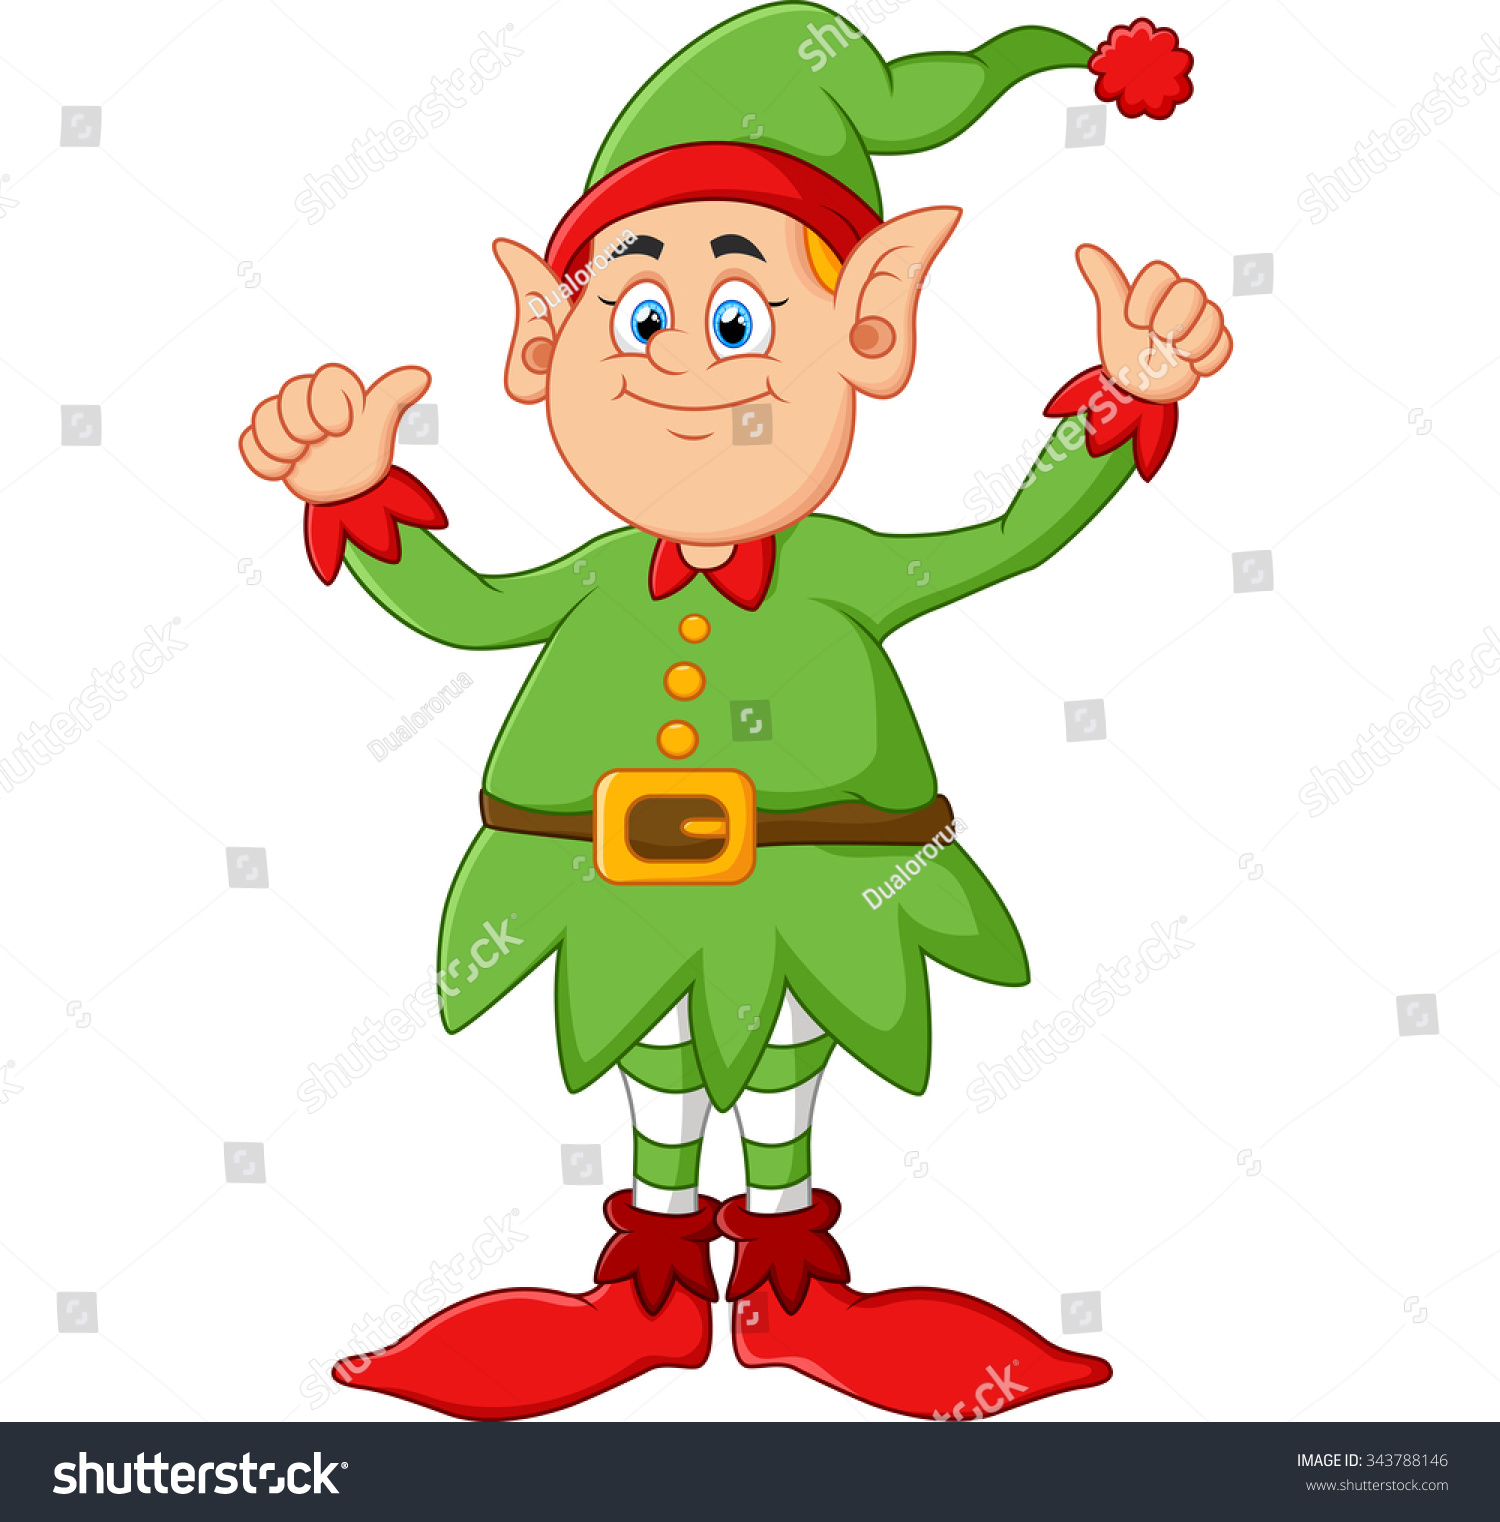 Cartoon Elf Giving Two Thumbs Up Stock Vector Illustration 343788146 ...